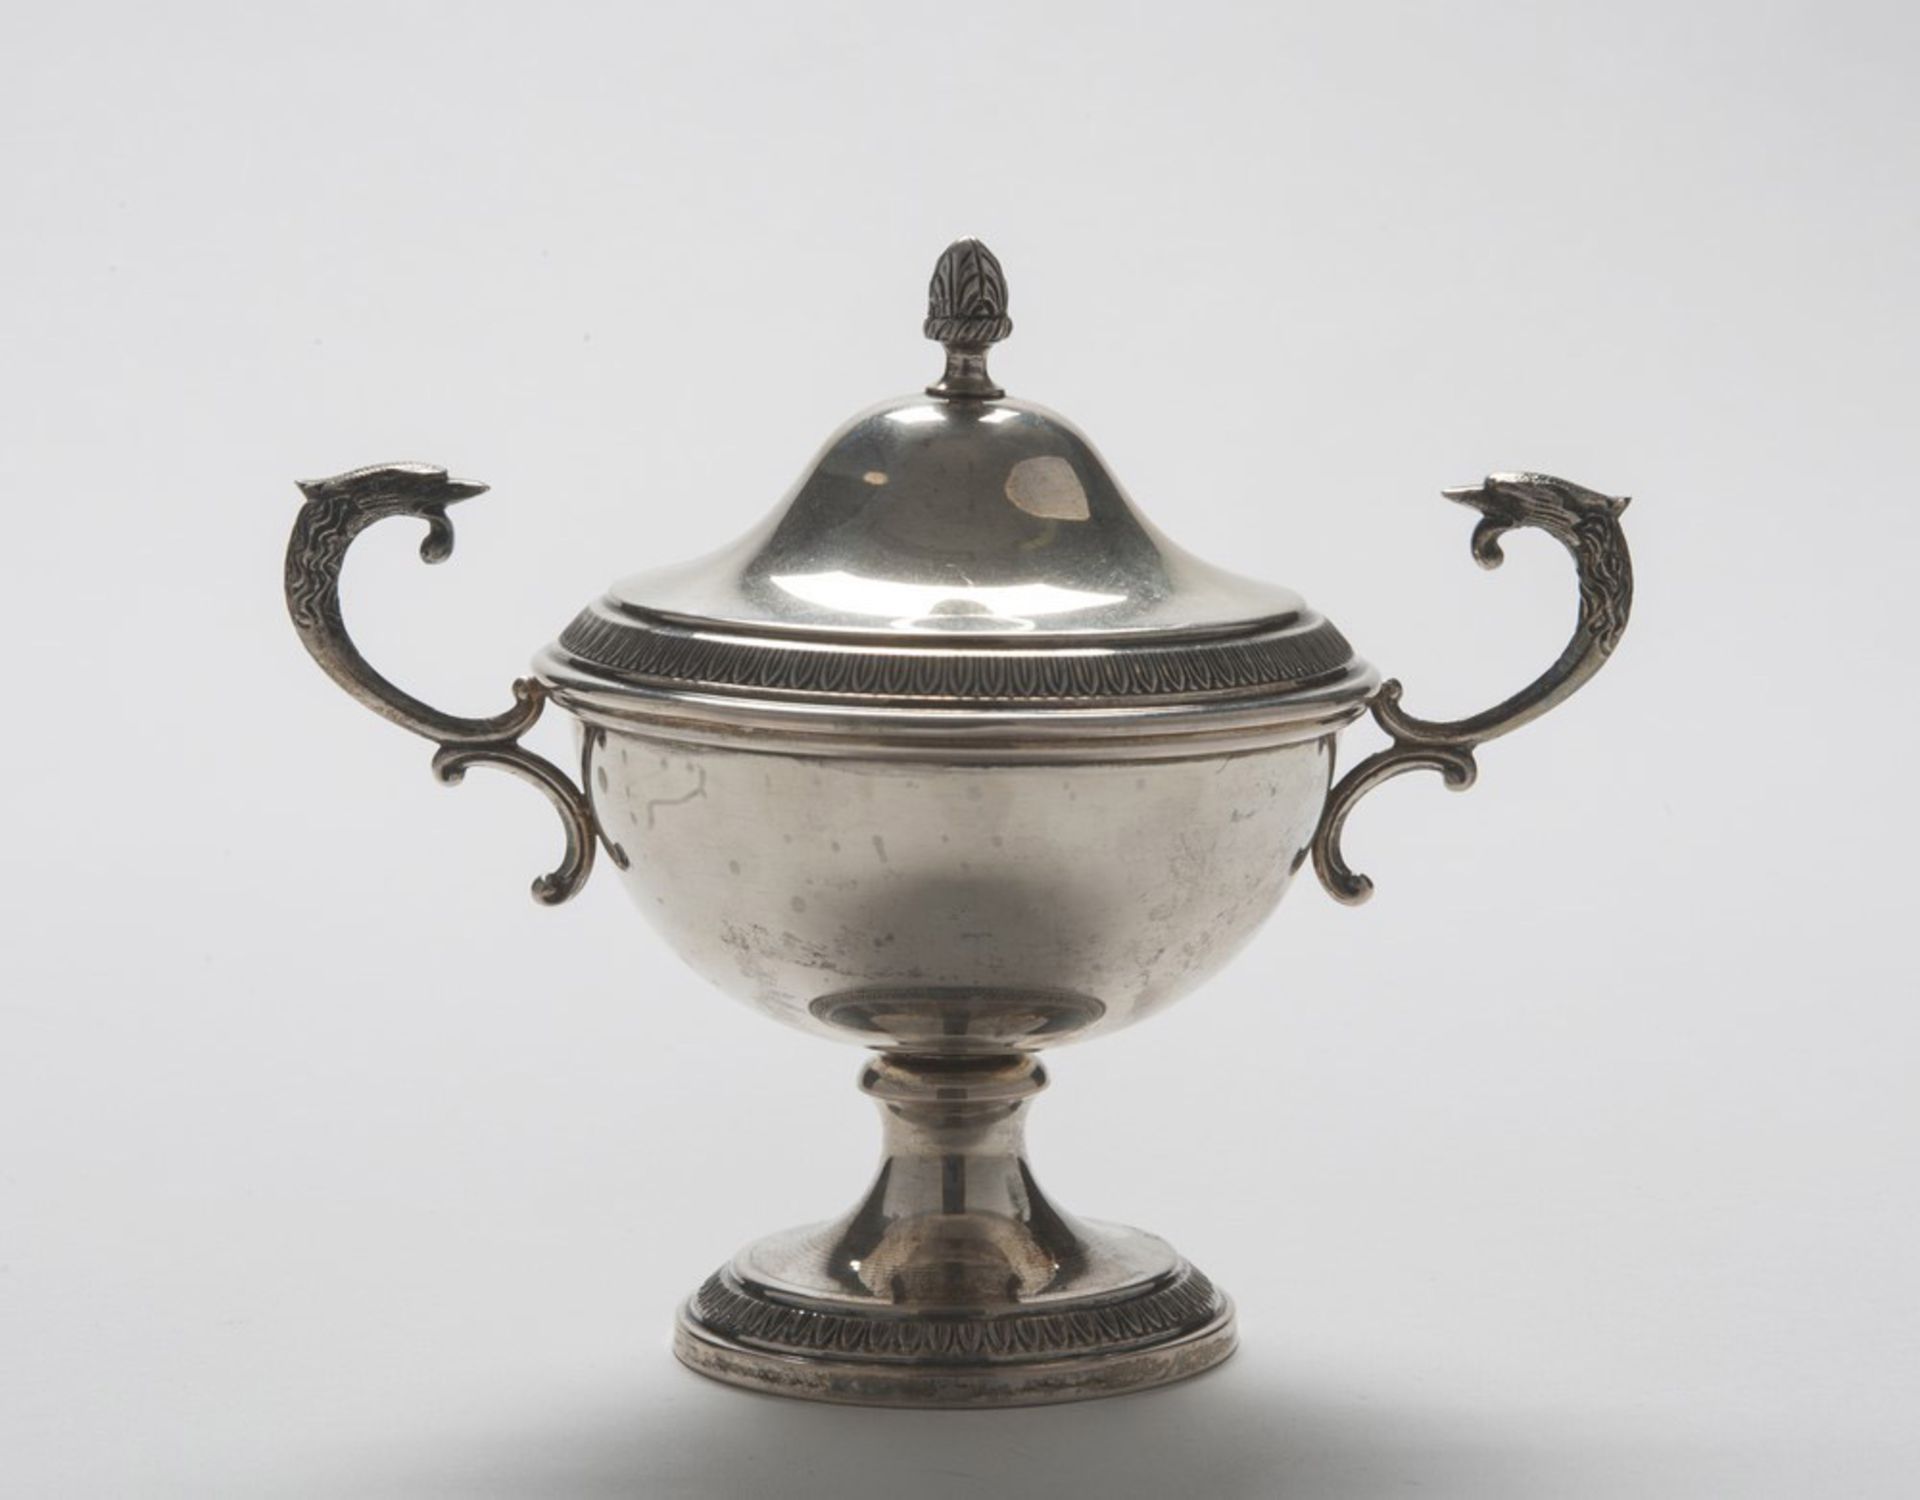 SILVER SUGAR BOWL, 20TH CENTURY gilded inside, griffons handles. Measures cm. 18 x 17 x 11, weight